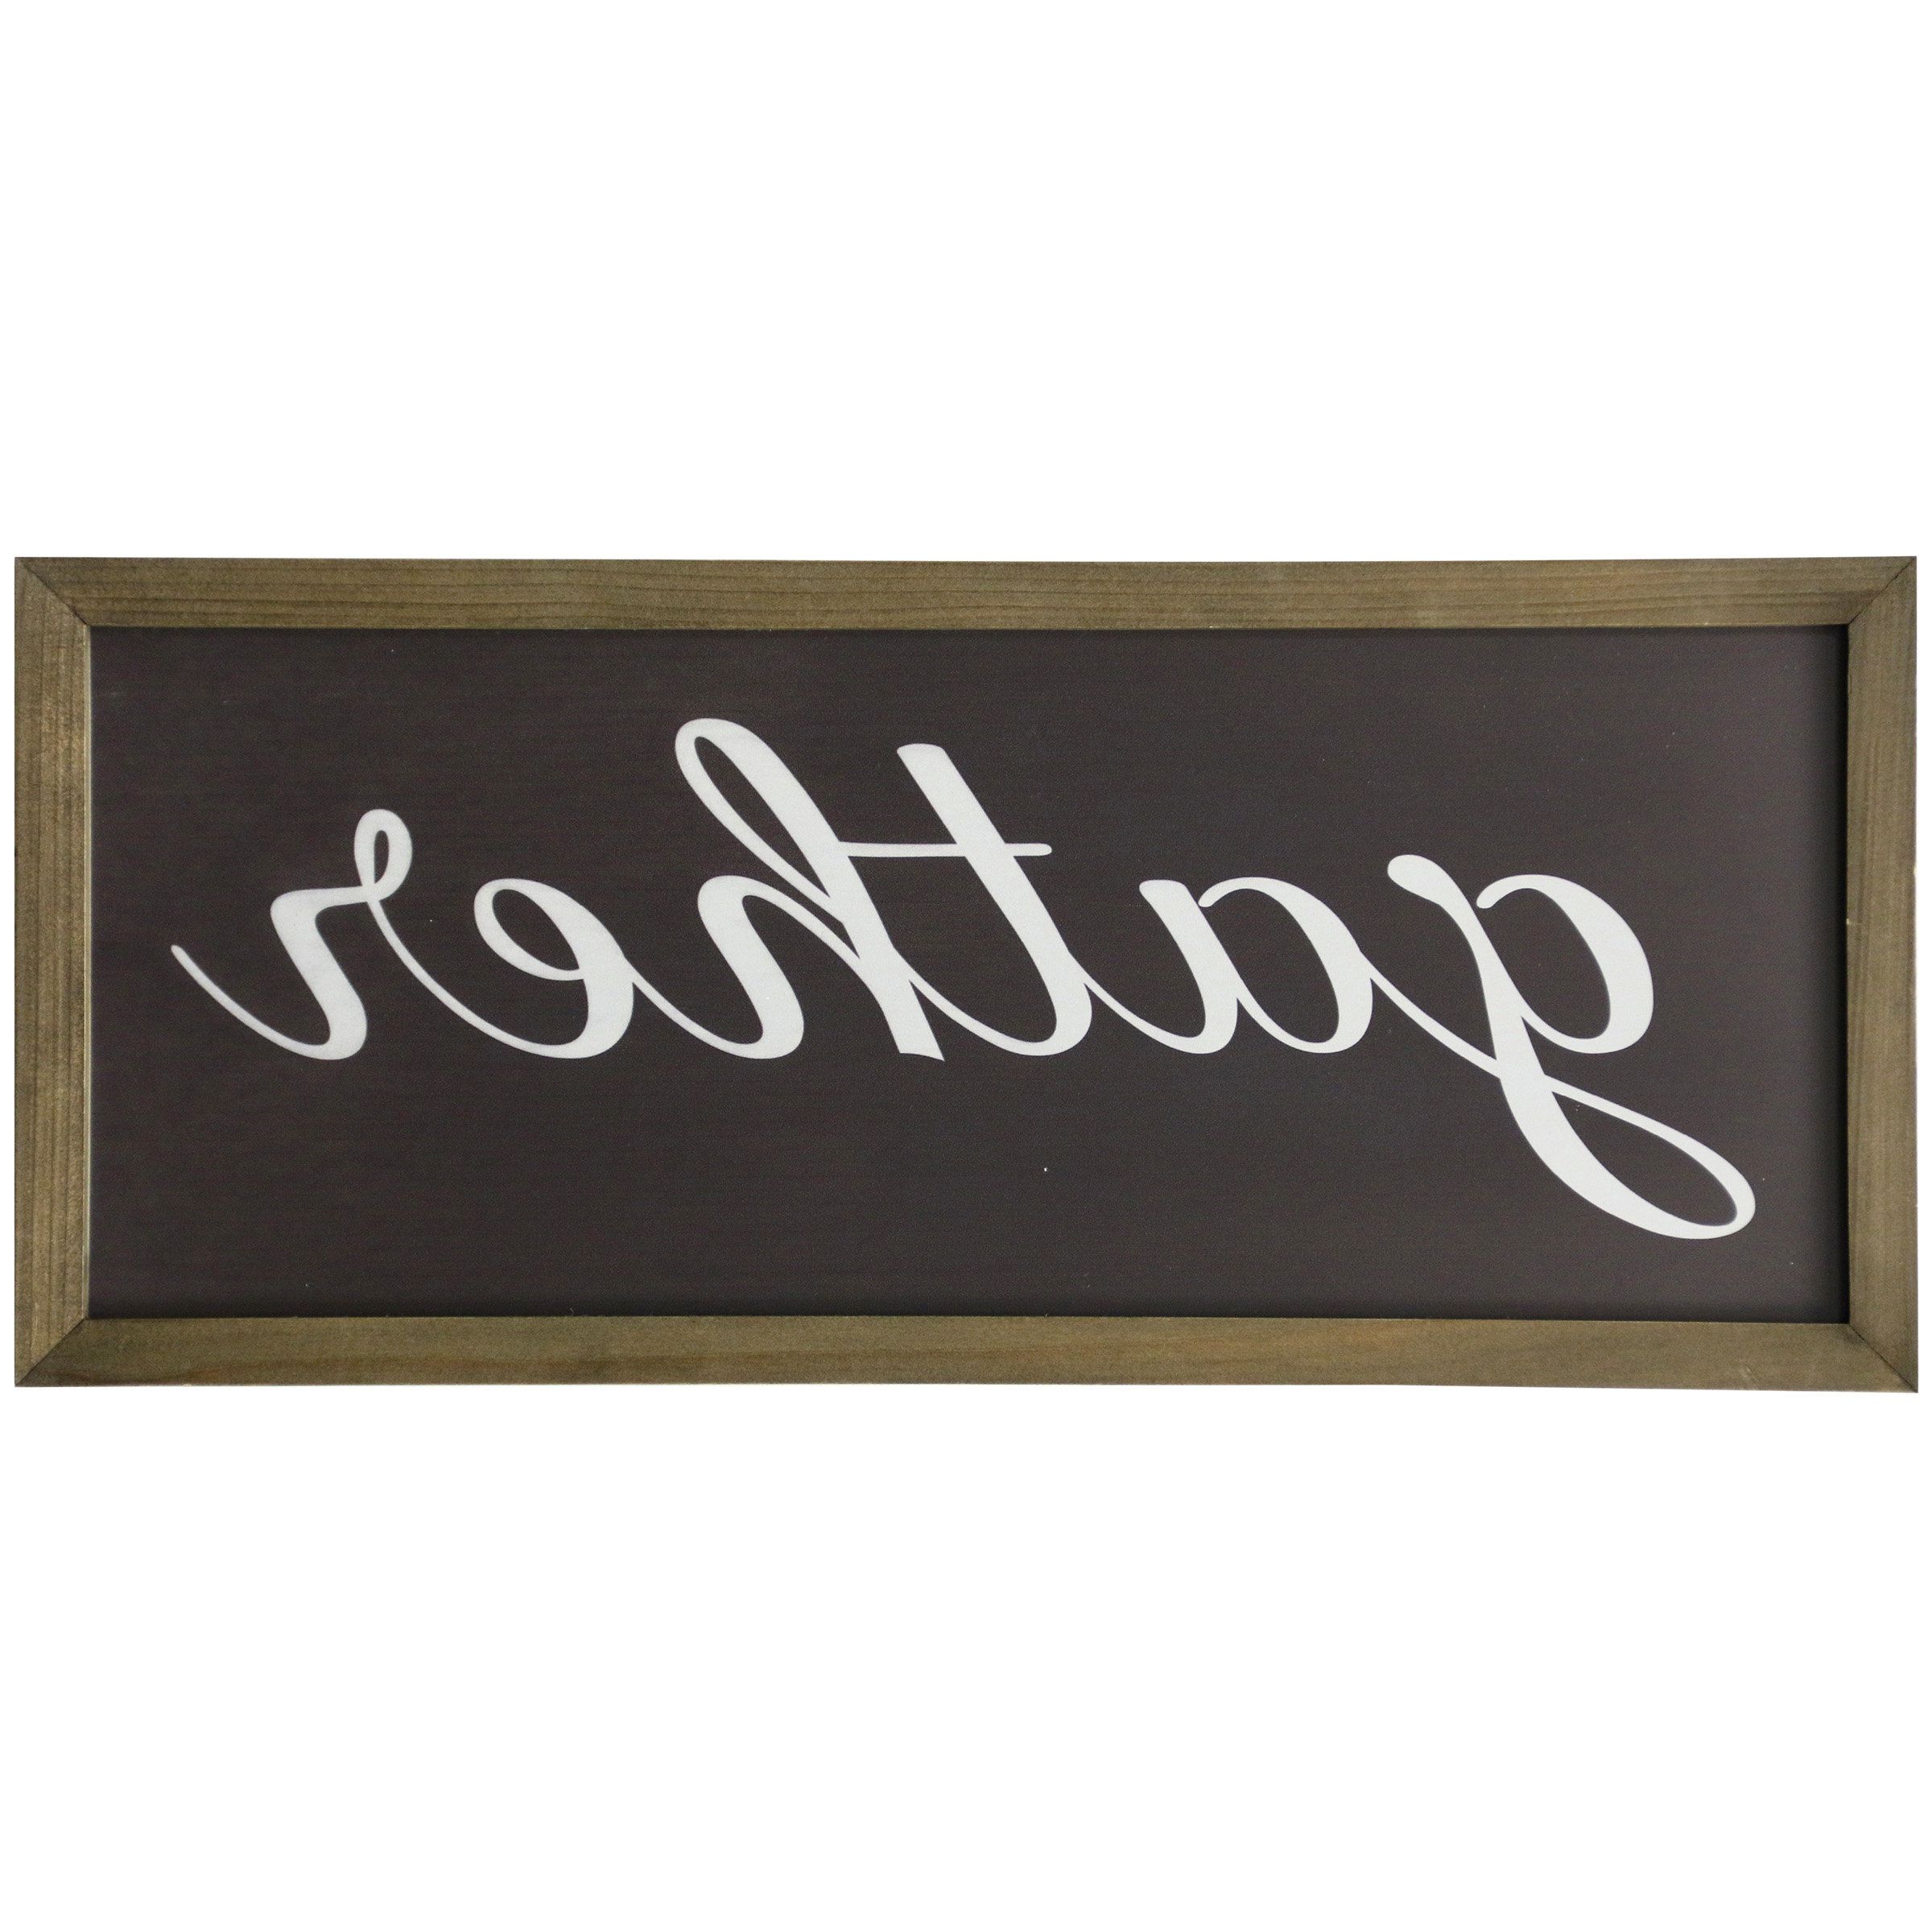 Widely Used Coffee Sign With Rebar Wall Decor With Regard To Gather Galvanized Metal Wall Décor & Reviews (View 10 of 20)